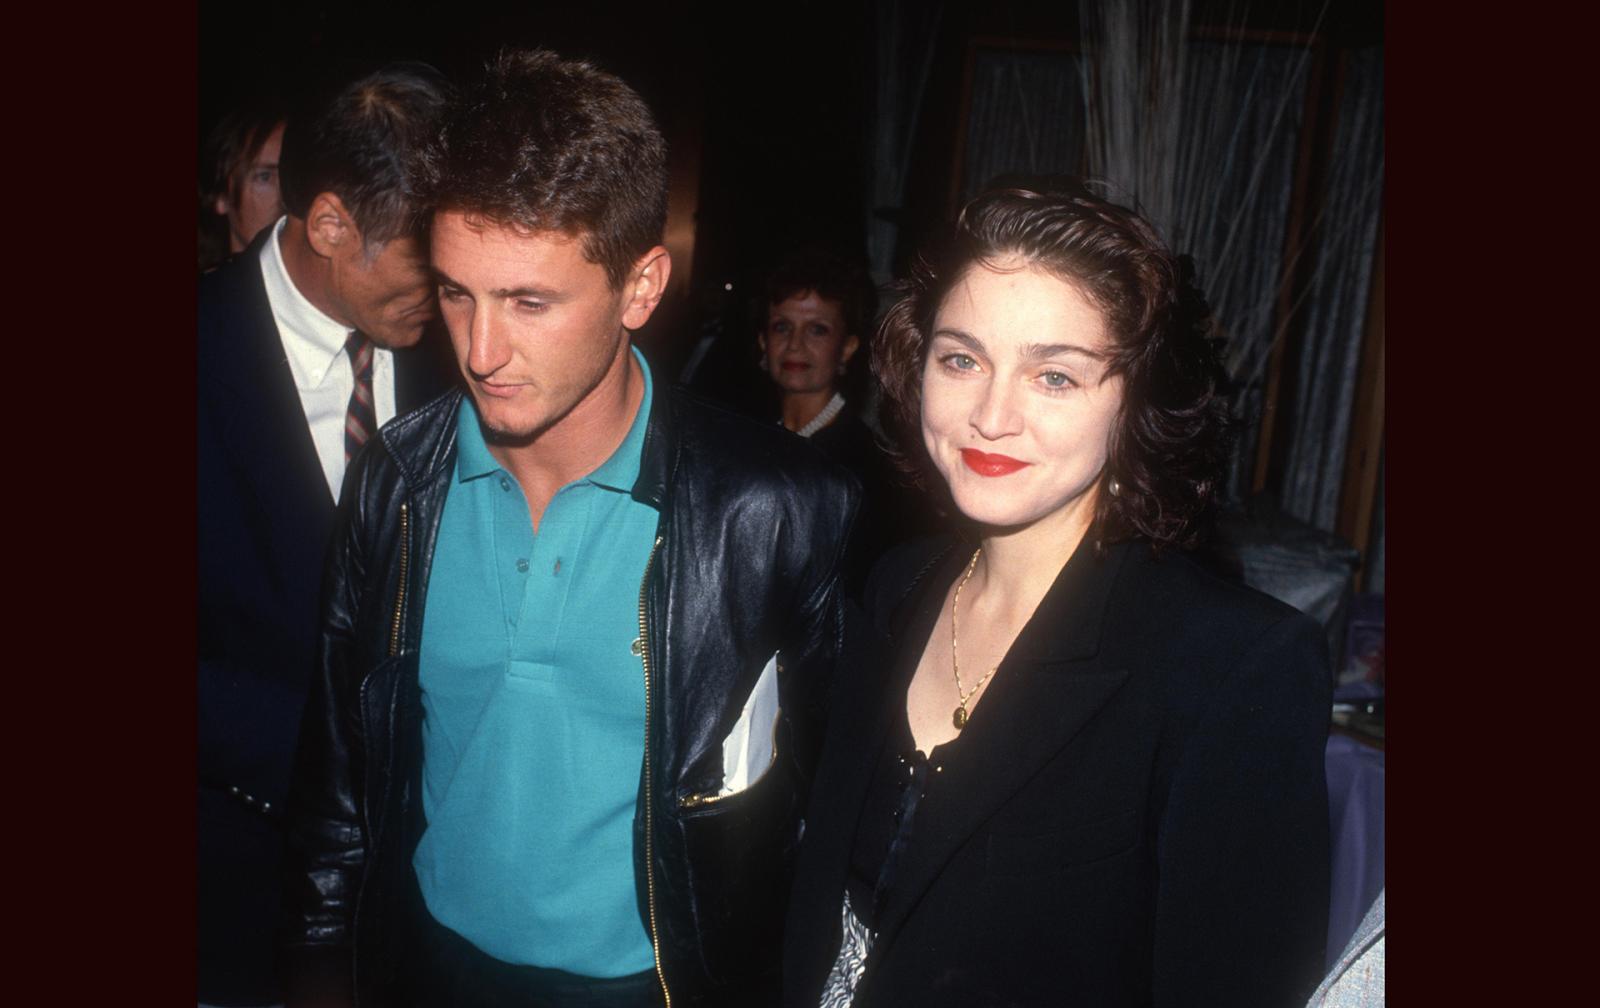 Celeb Fashion History 101: These Couples Ruled the Red Carpet - image 4